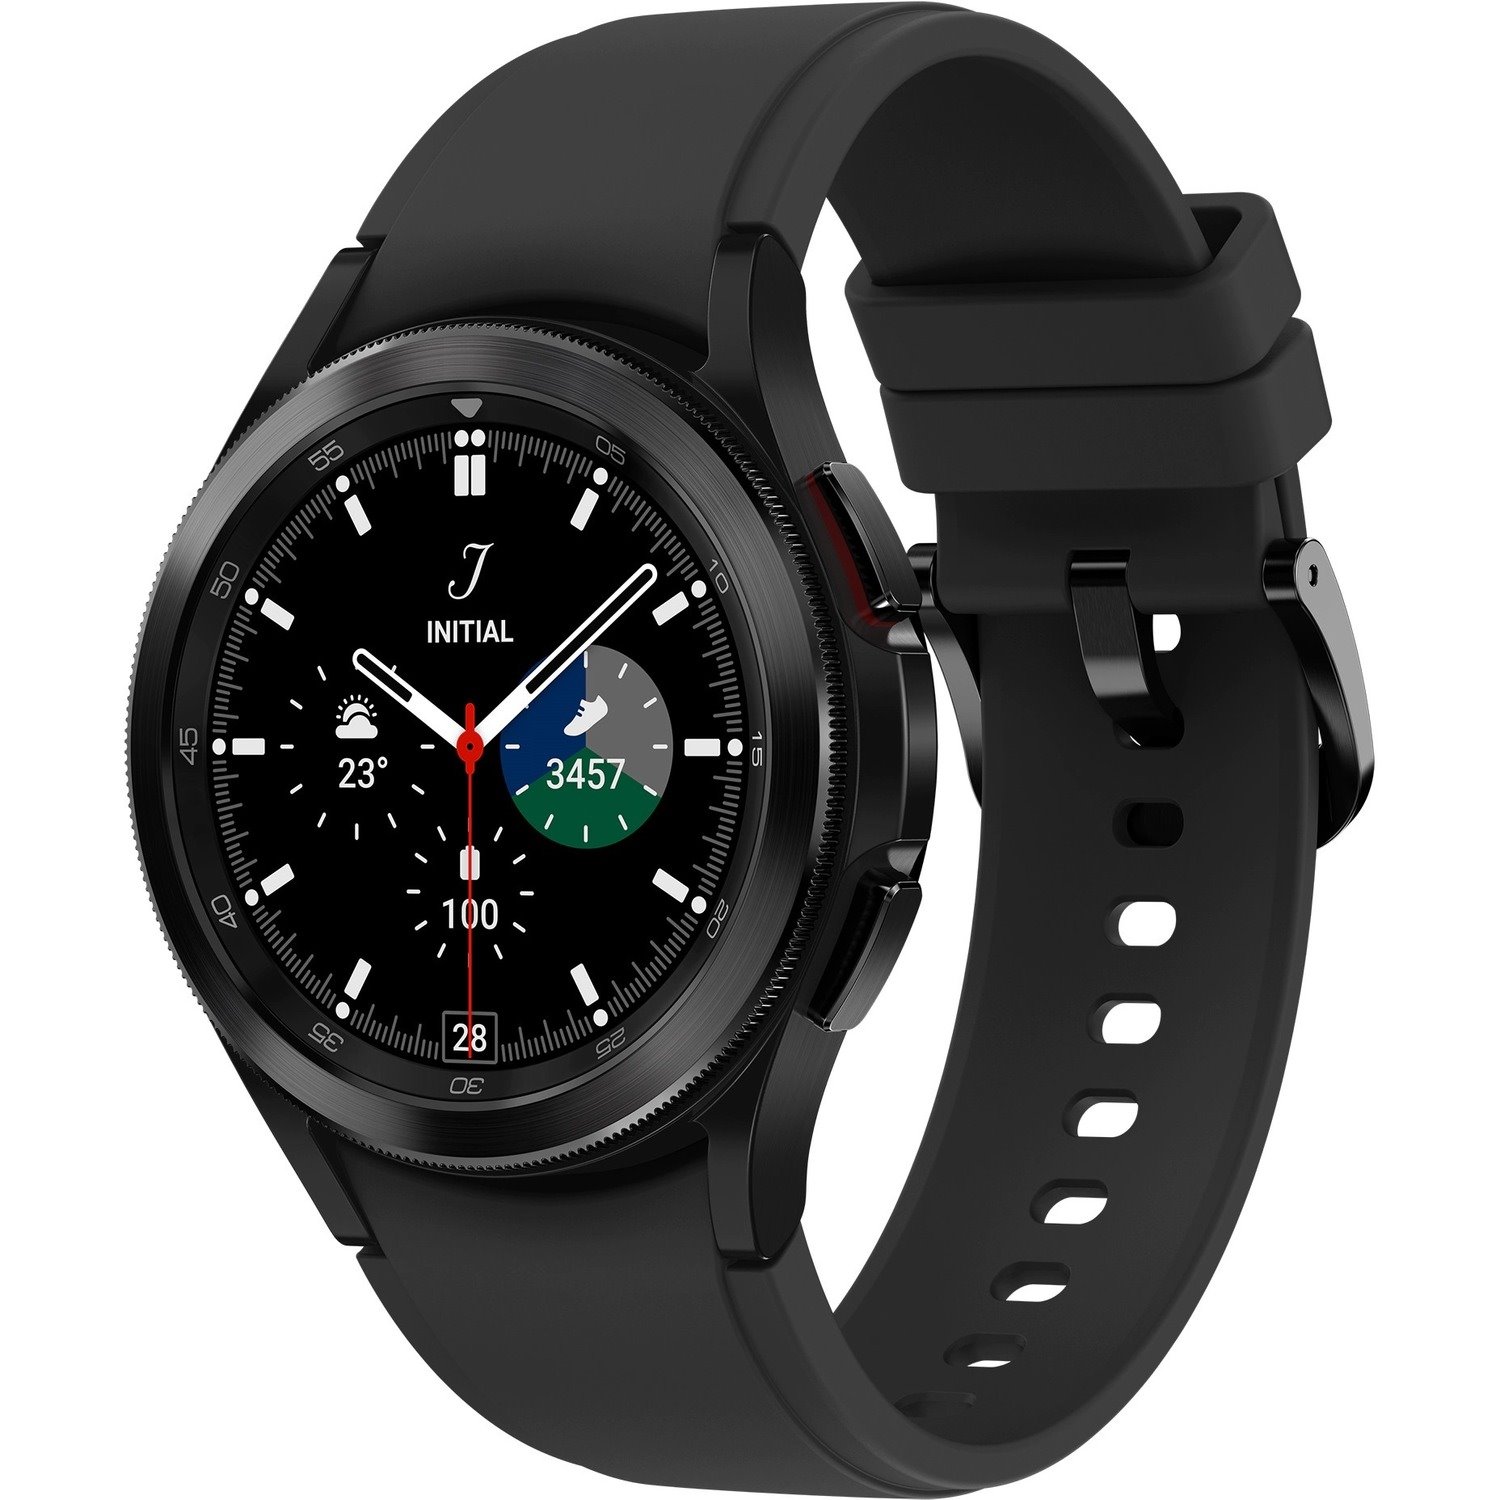 Samsung Galaxy Watch4 Classic SM-R885F Smart Watch - Black Body Color - Stainless Steel, Glass Body Material - Wireless LAN - 4G